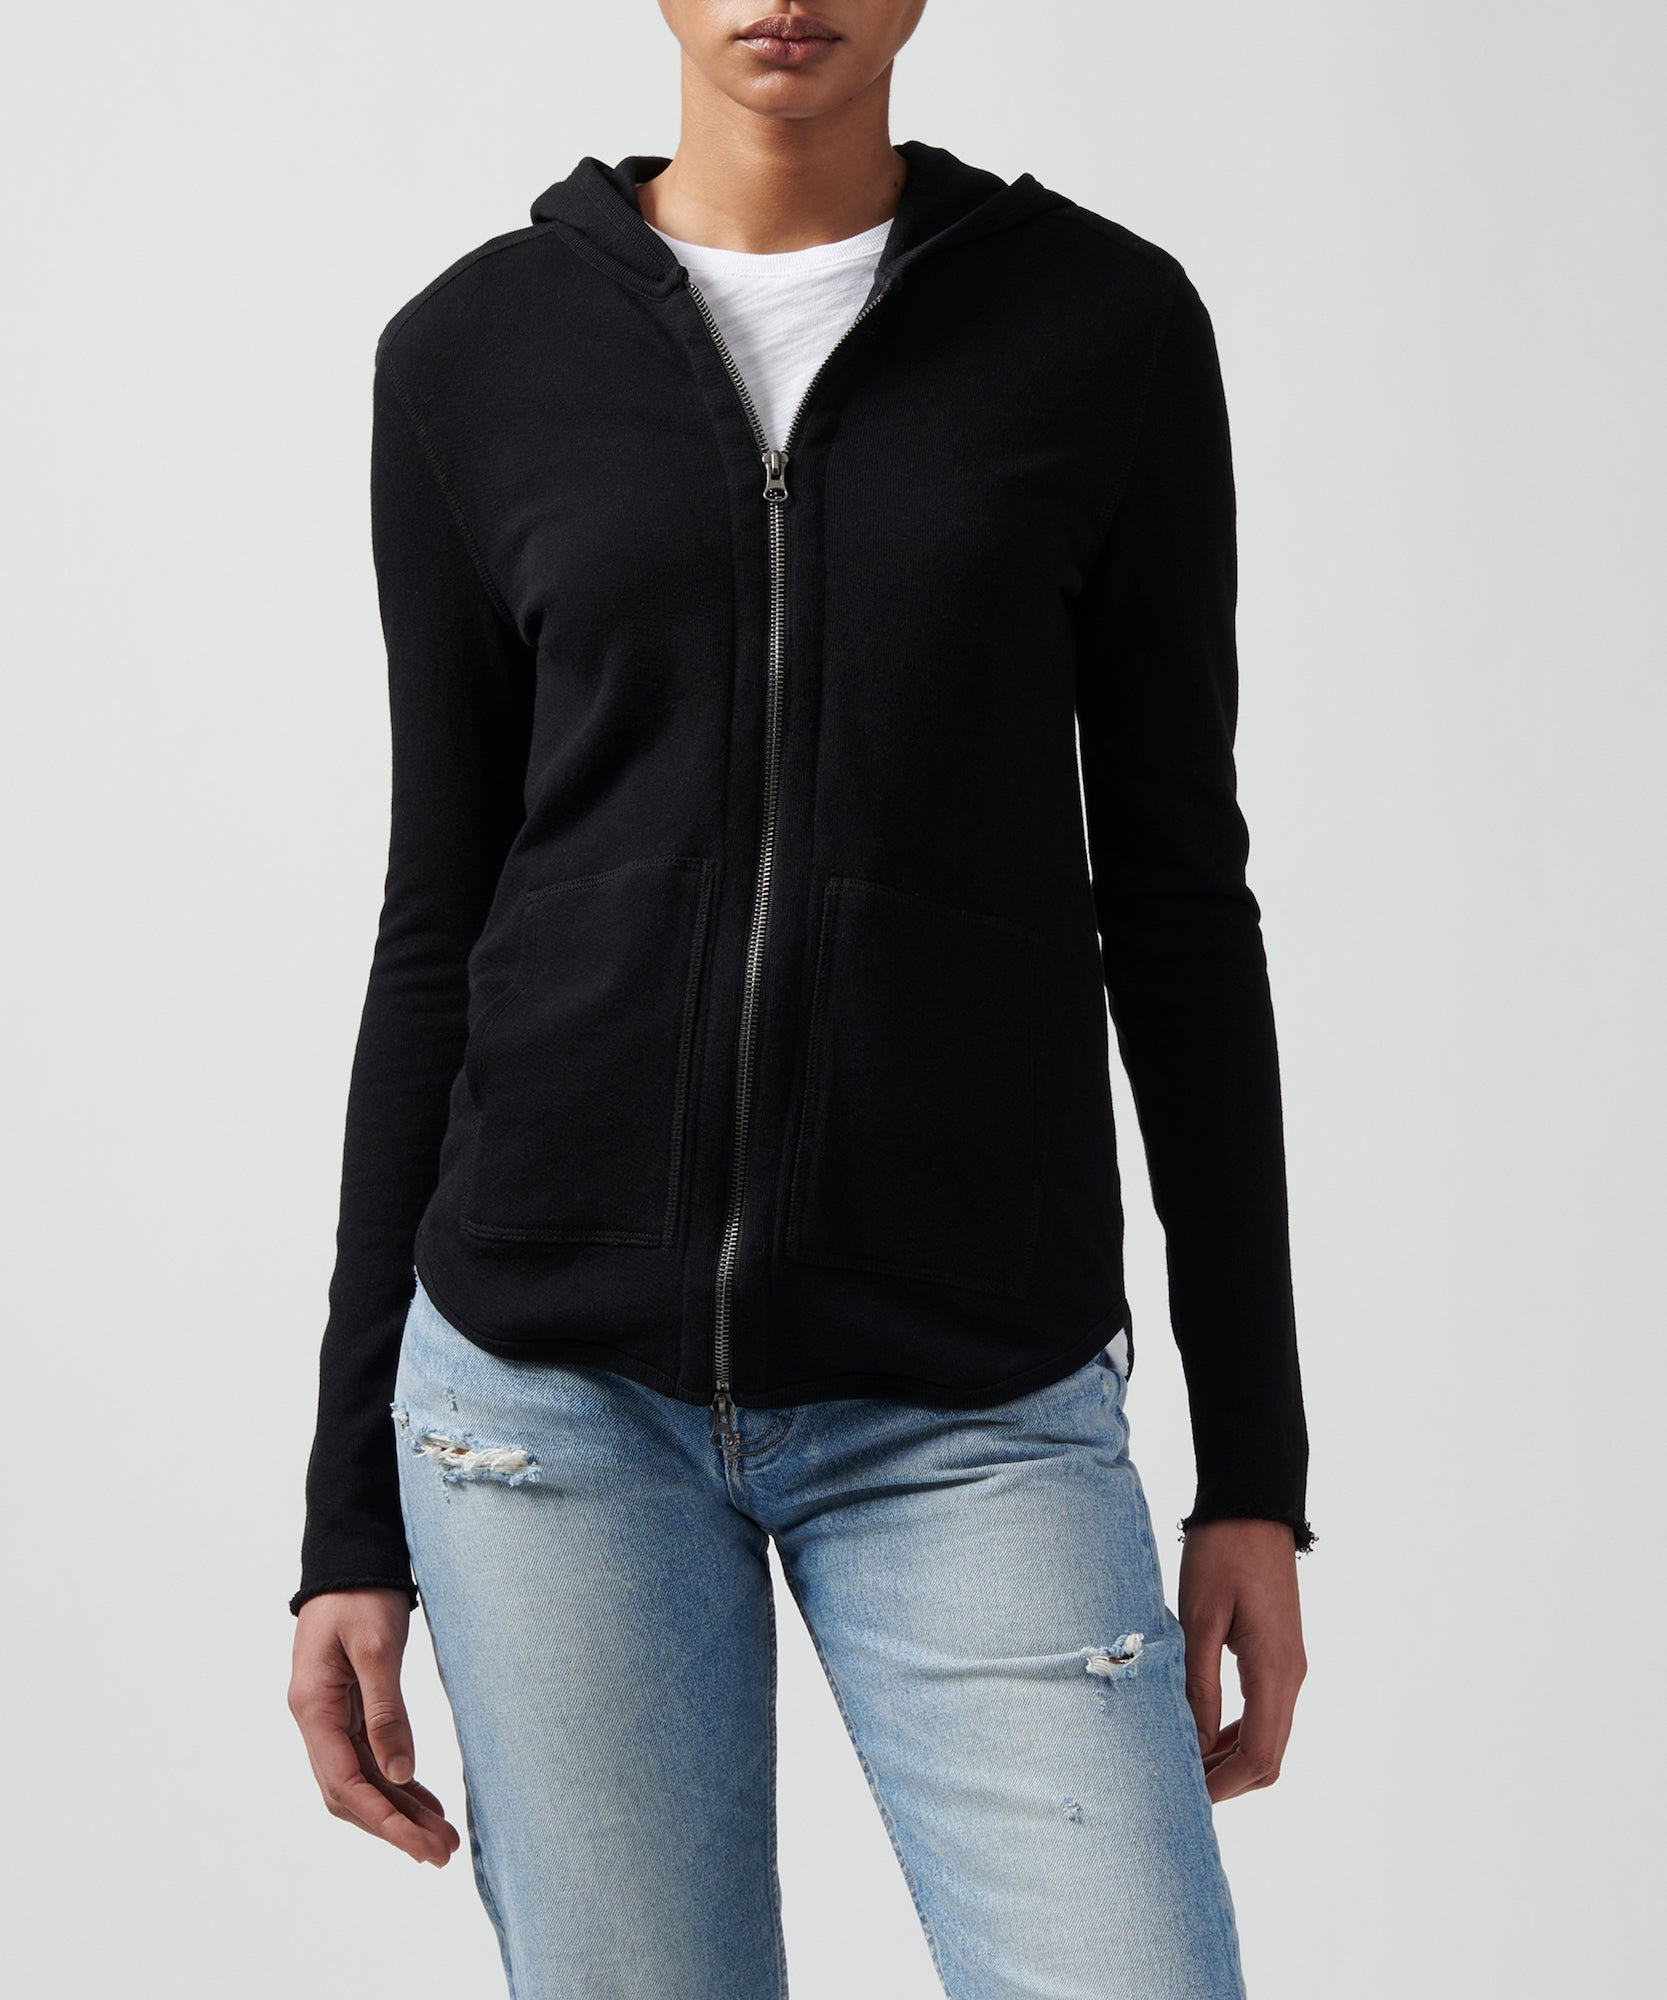 ATM Anthony Thomas Melillo Women's French Terry Zip-Up Hoodie - Black